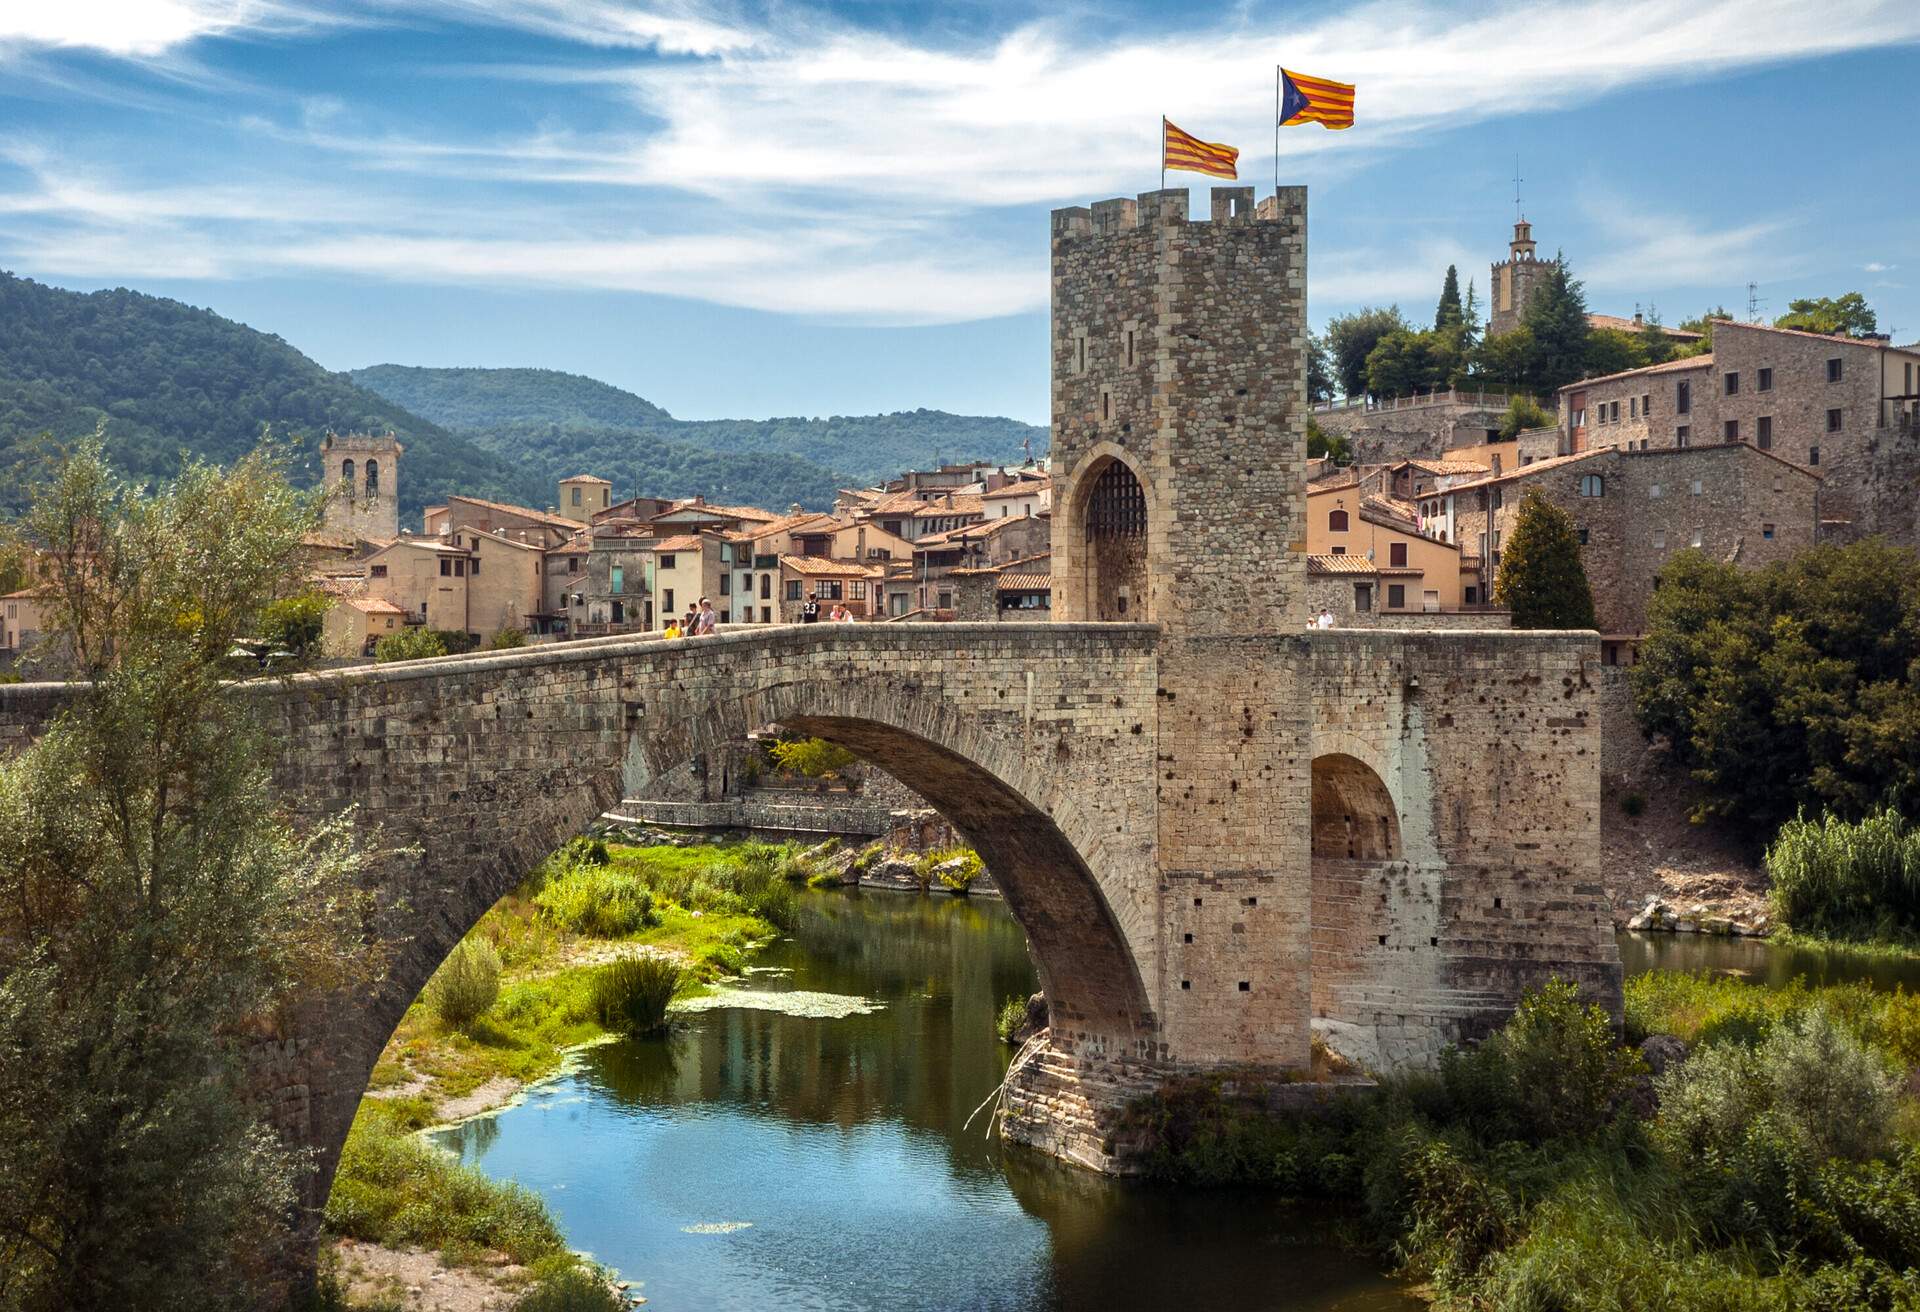 Just 33 kilometers from Girona, in the middle region of the Garrotxa, located at the confluence of the Fluvia rivers and Capellades the county town of Besalu, whose monumental, excellently preserved and beautifully restored is won him international recognition being declared a Historic artísitic in 1966.